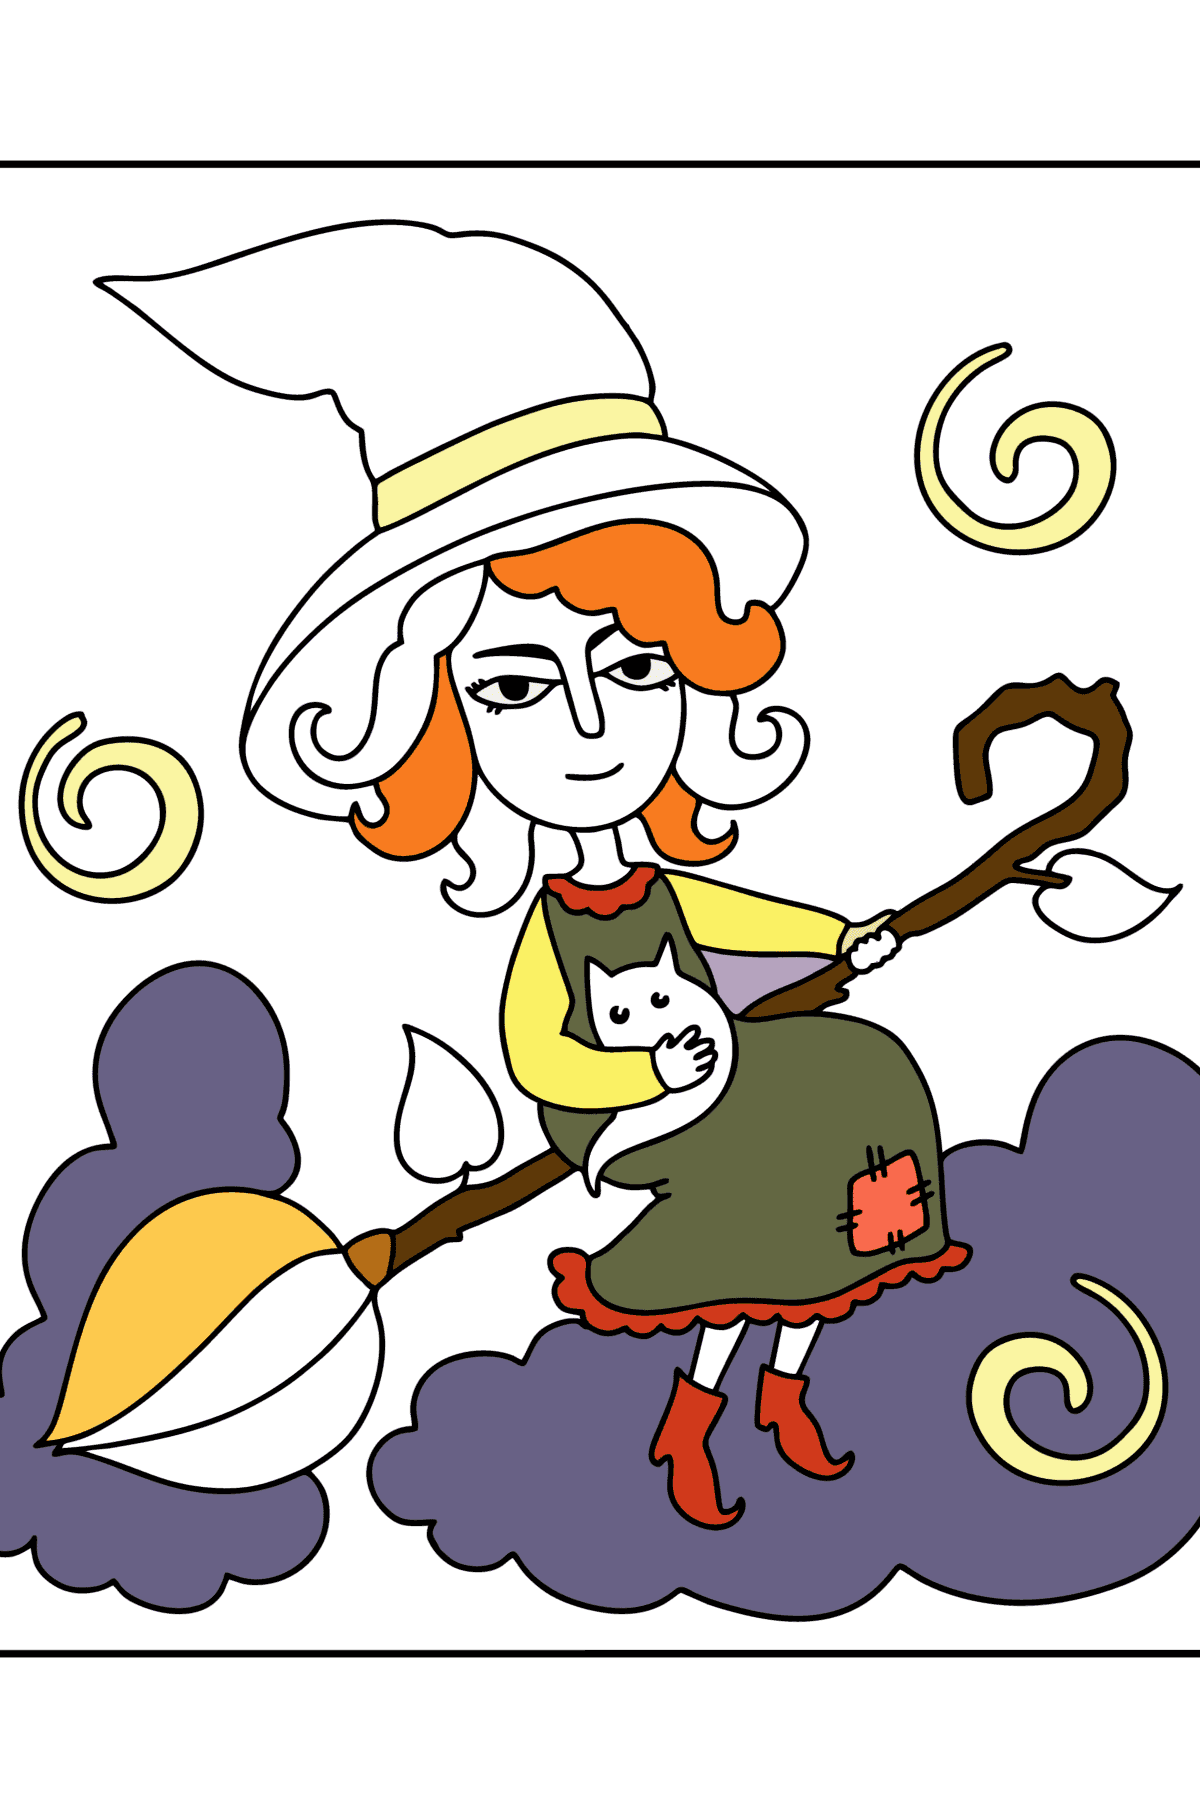 Witch flying on a broomstick сoloring page - Coloring Pages for Kids